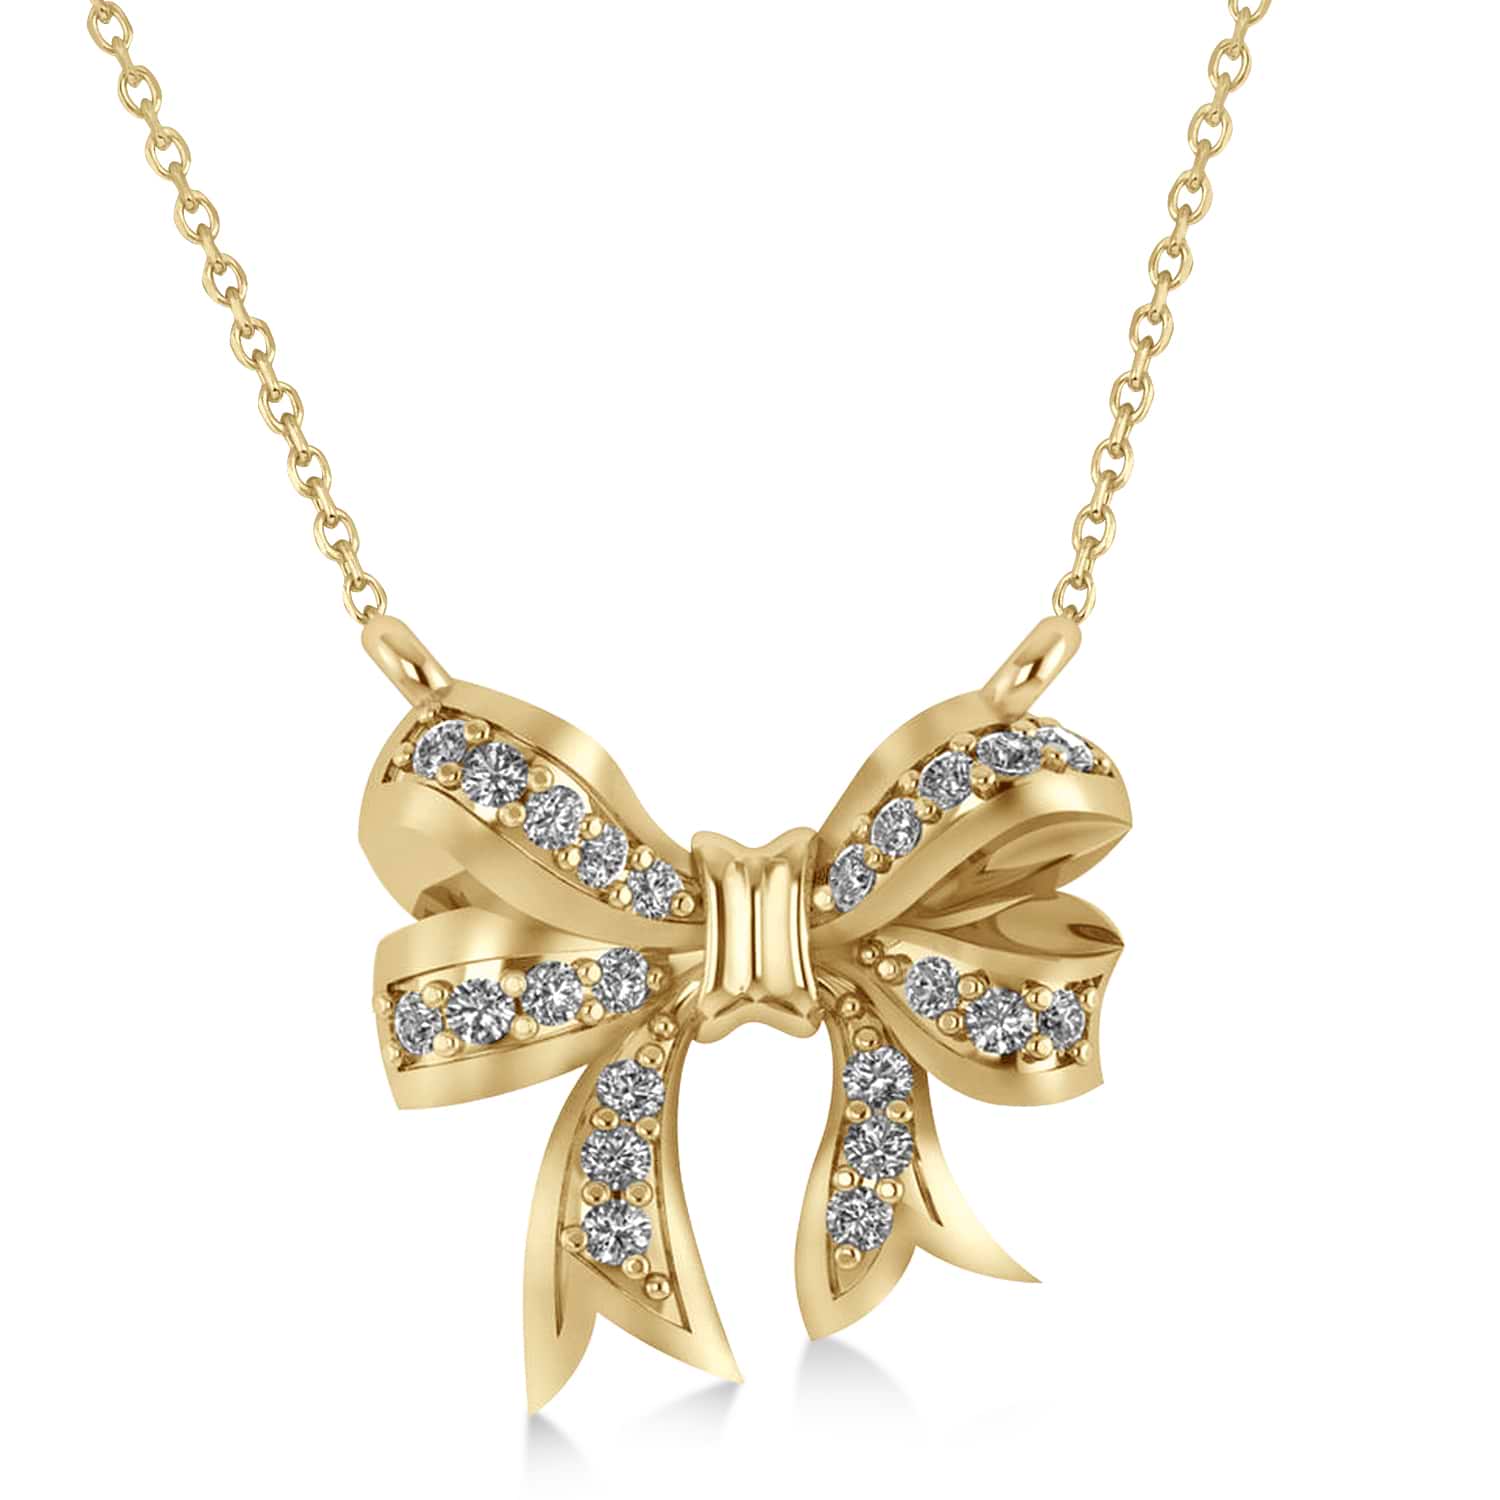 Bow Tie Necklace Gold Filigree Bow Jewelry - N118